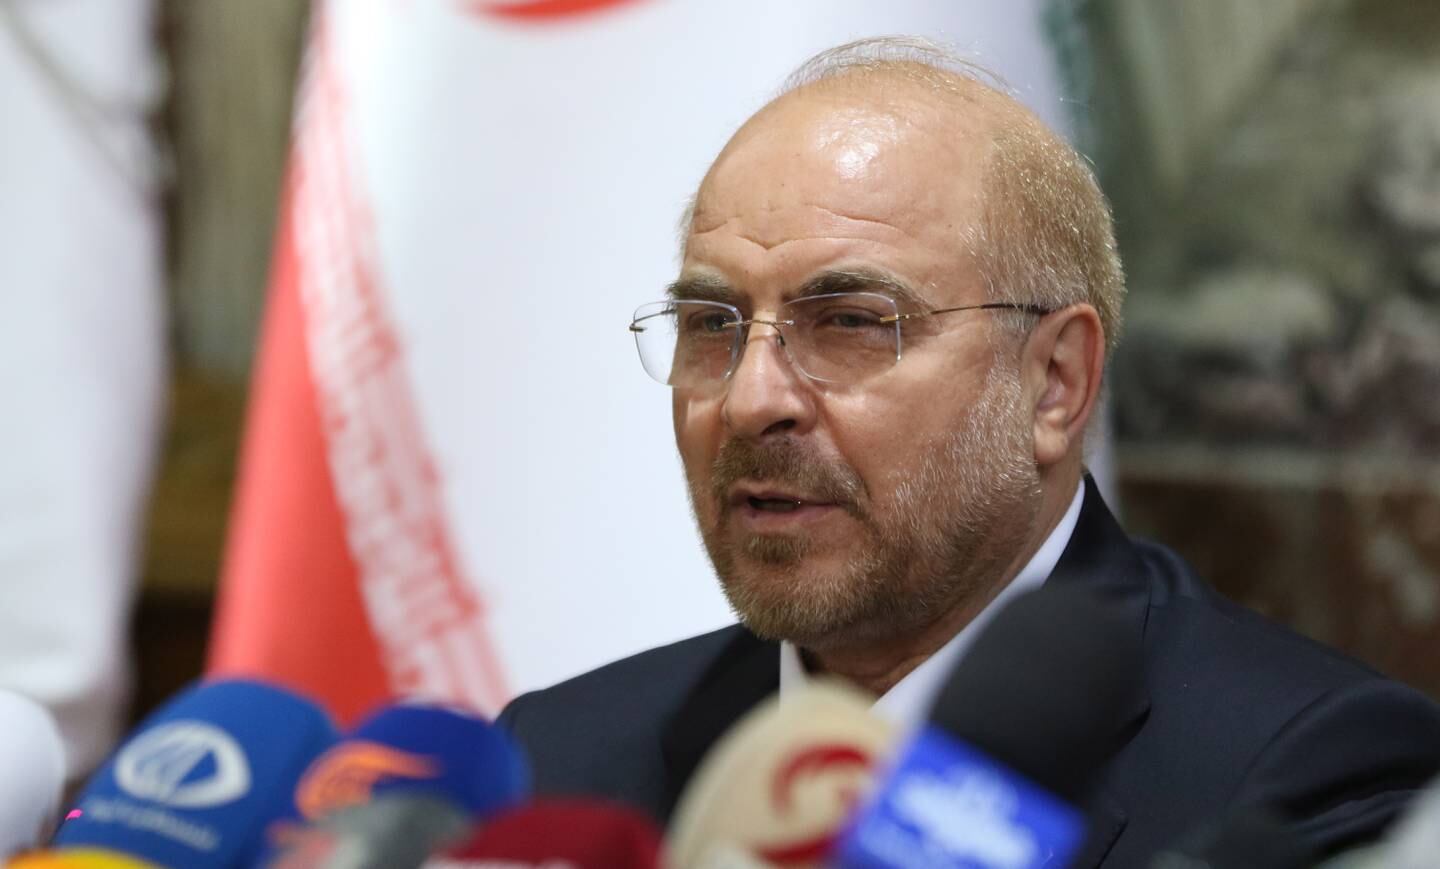 Could Iranian Parliament Speaker Mohammad Baqer Qalibaf be the man to lead the country. EPA